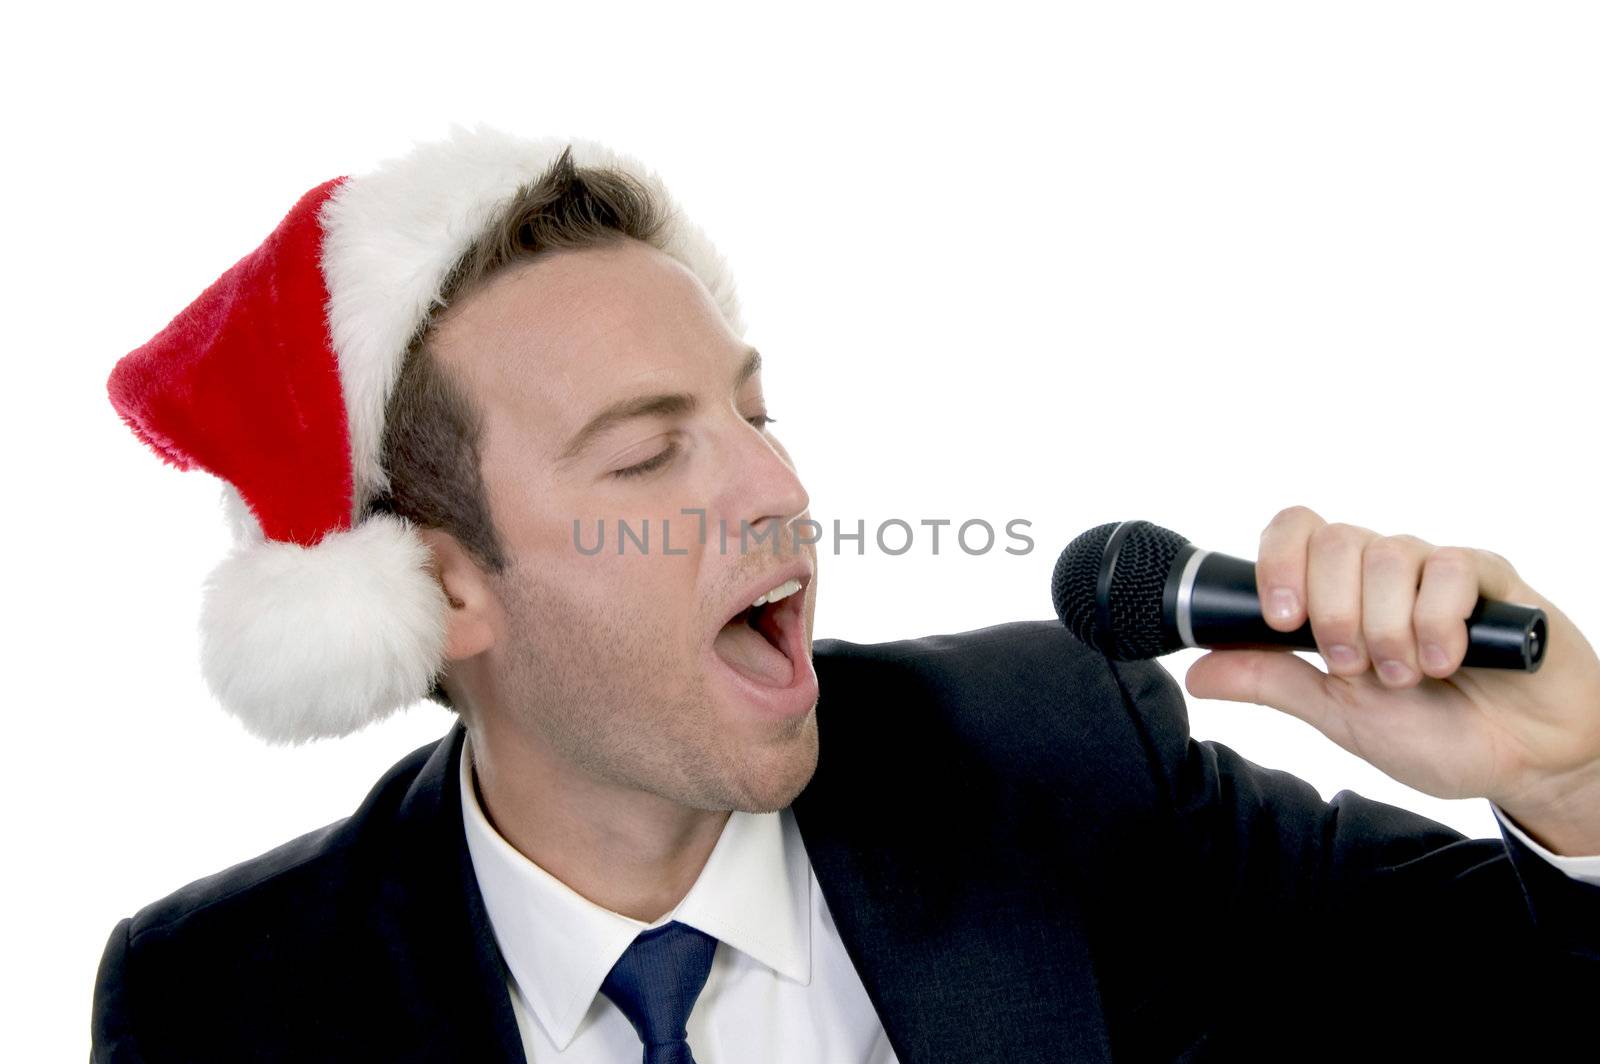 young man singing into microphone with santa cap by imagerymajestic